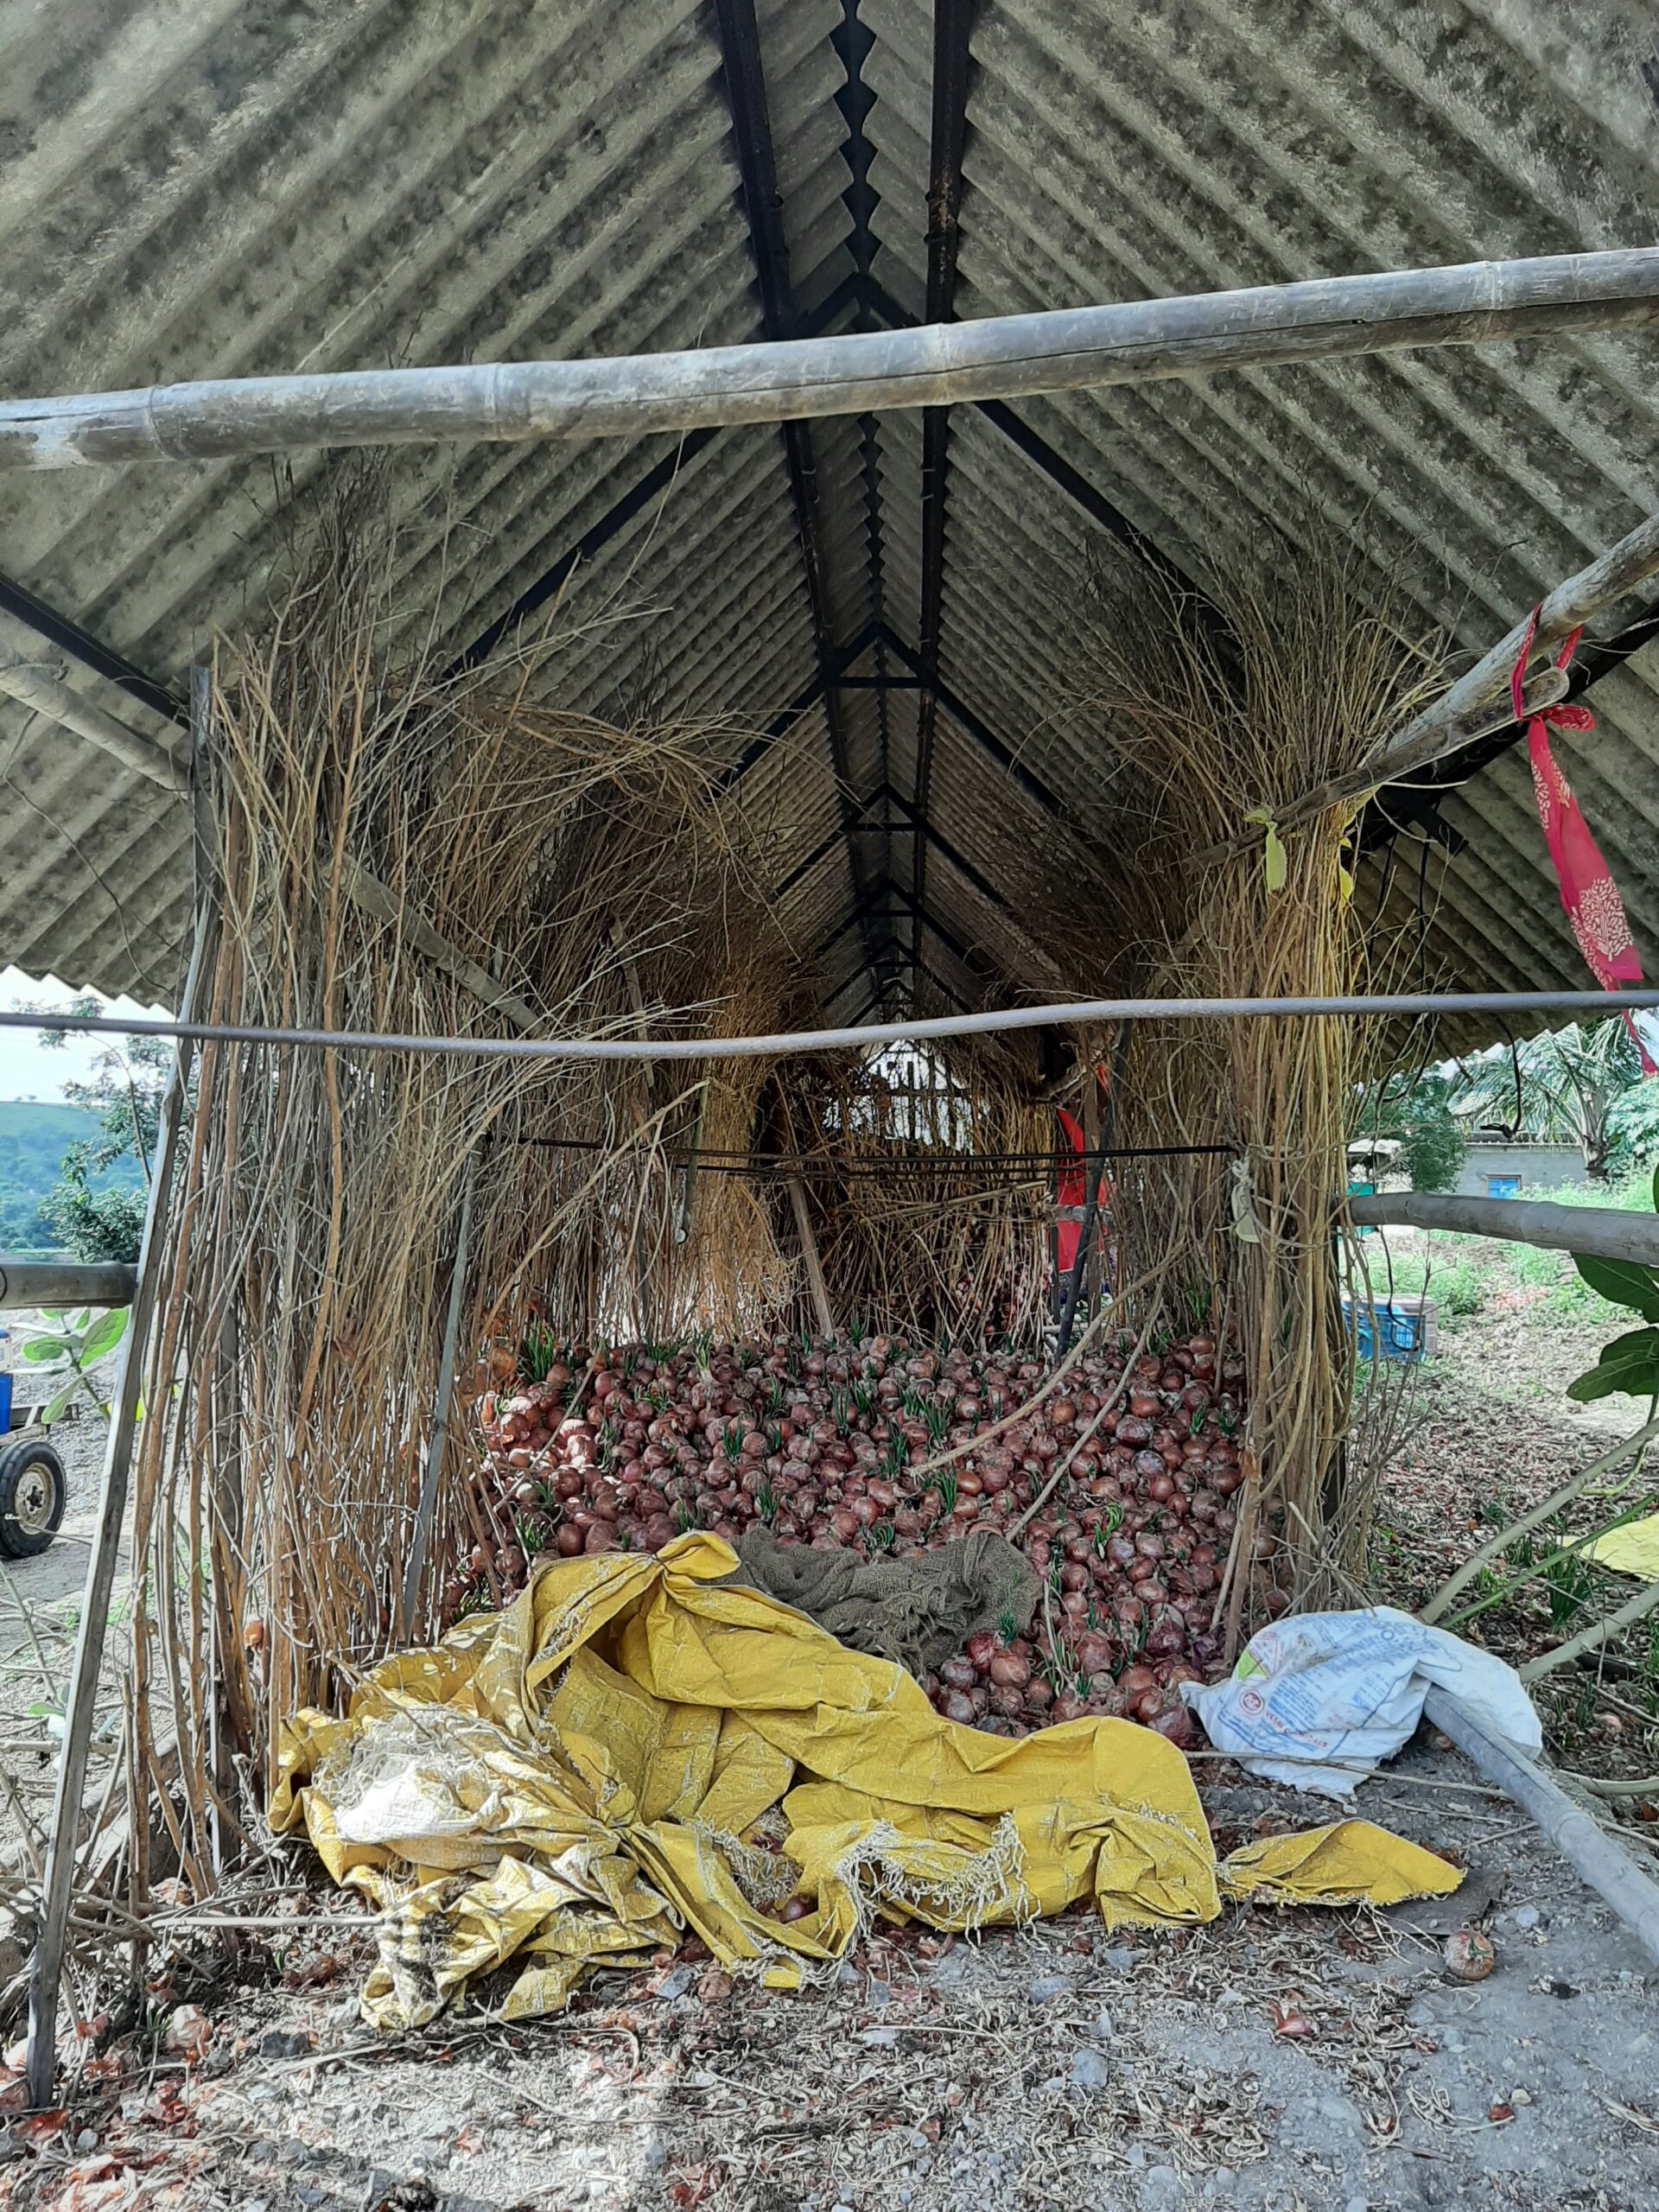 Onions sprouting in a storage shed in Wadzire, to be discarded soon. Photo by Mukta Deodhar, Srushti Paranjpe